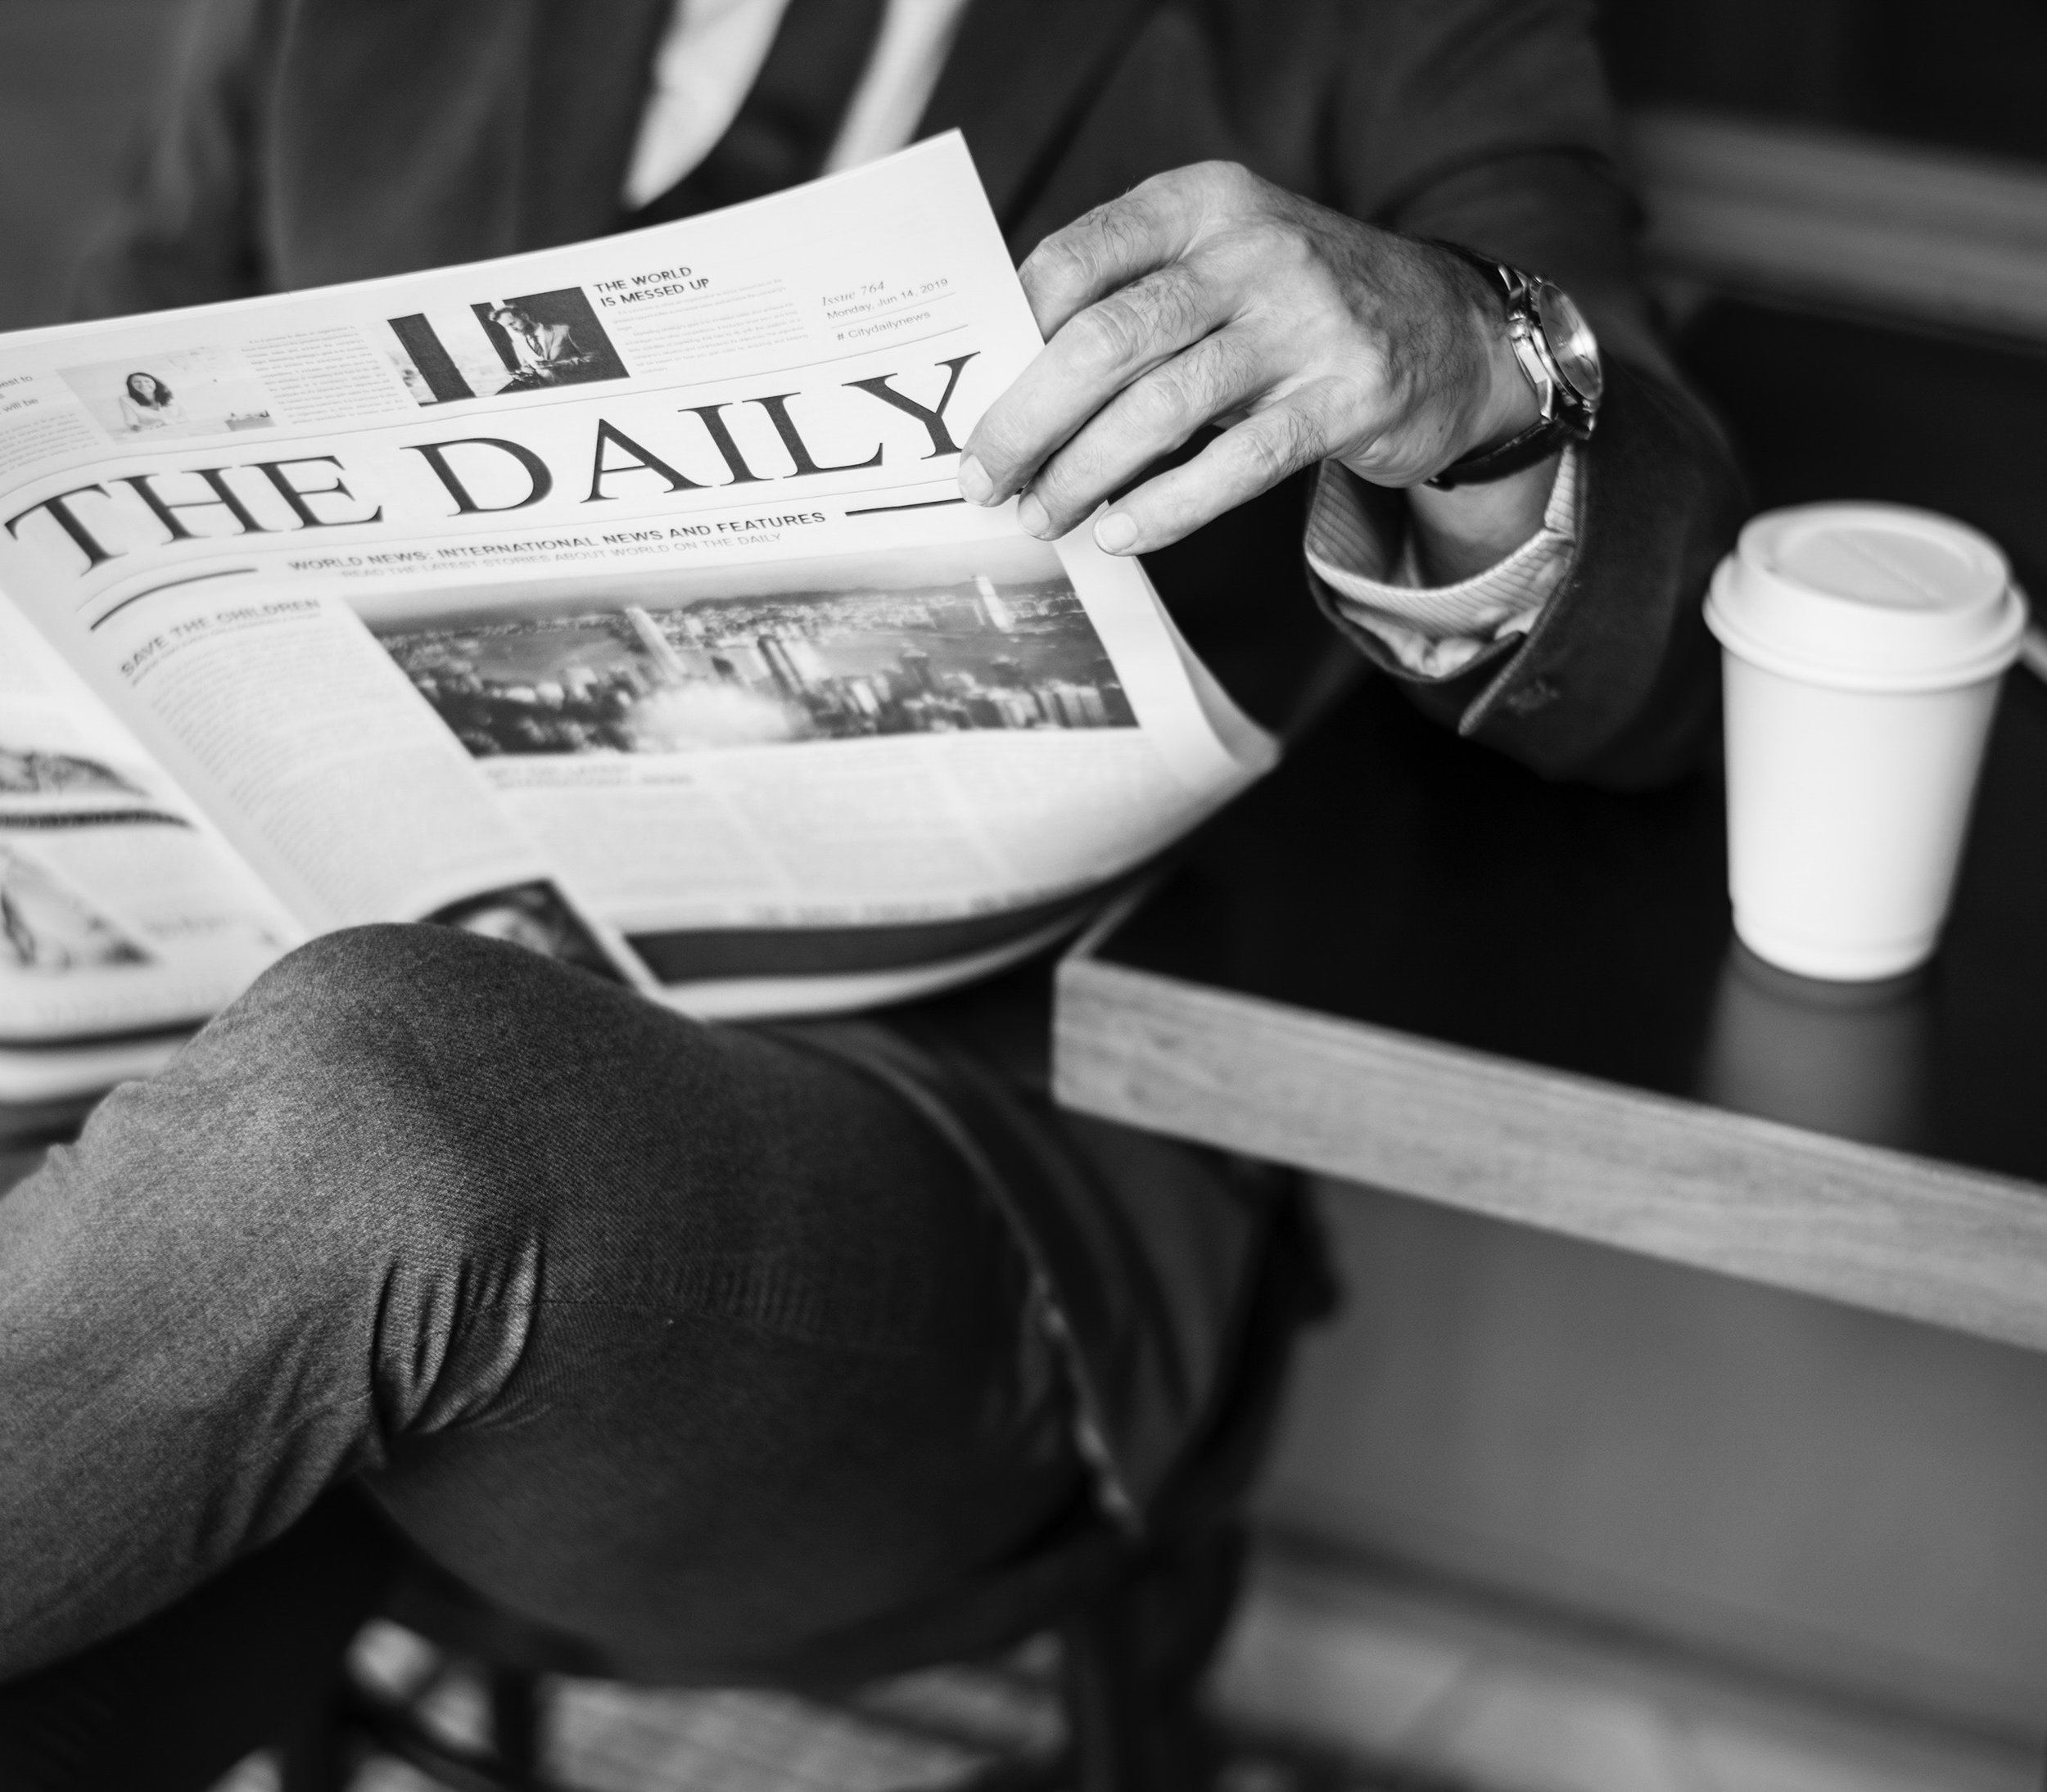 A person reads a newspaper while sitting on a bench with a paper coffee cup on a table beside them